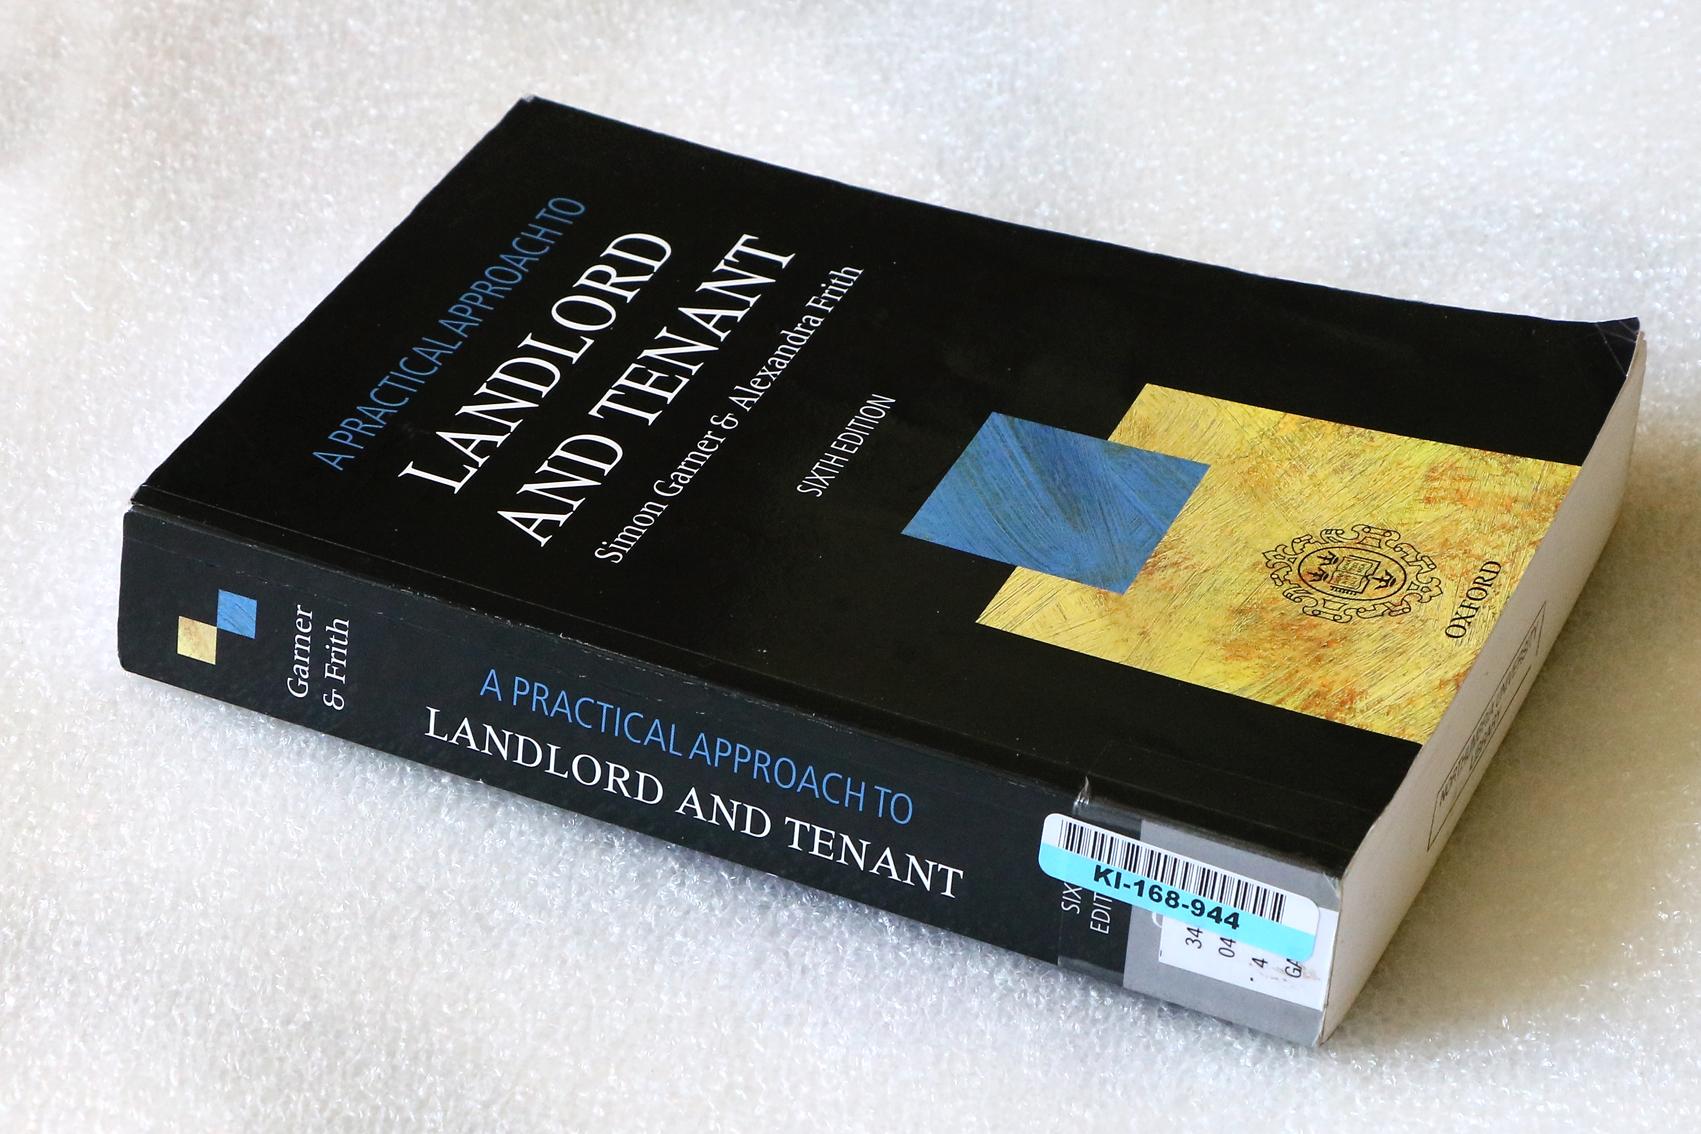 A Practical Approach to Landlord and Tenant (Practical Approach Series) - Simon Garner & Alexander Frith